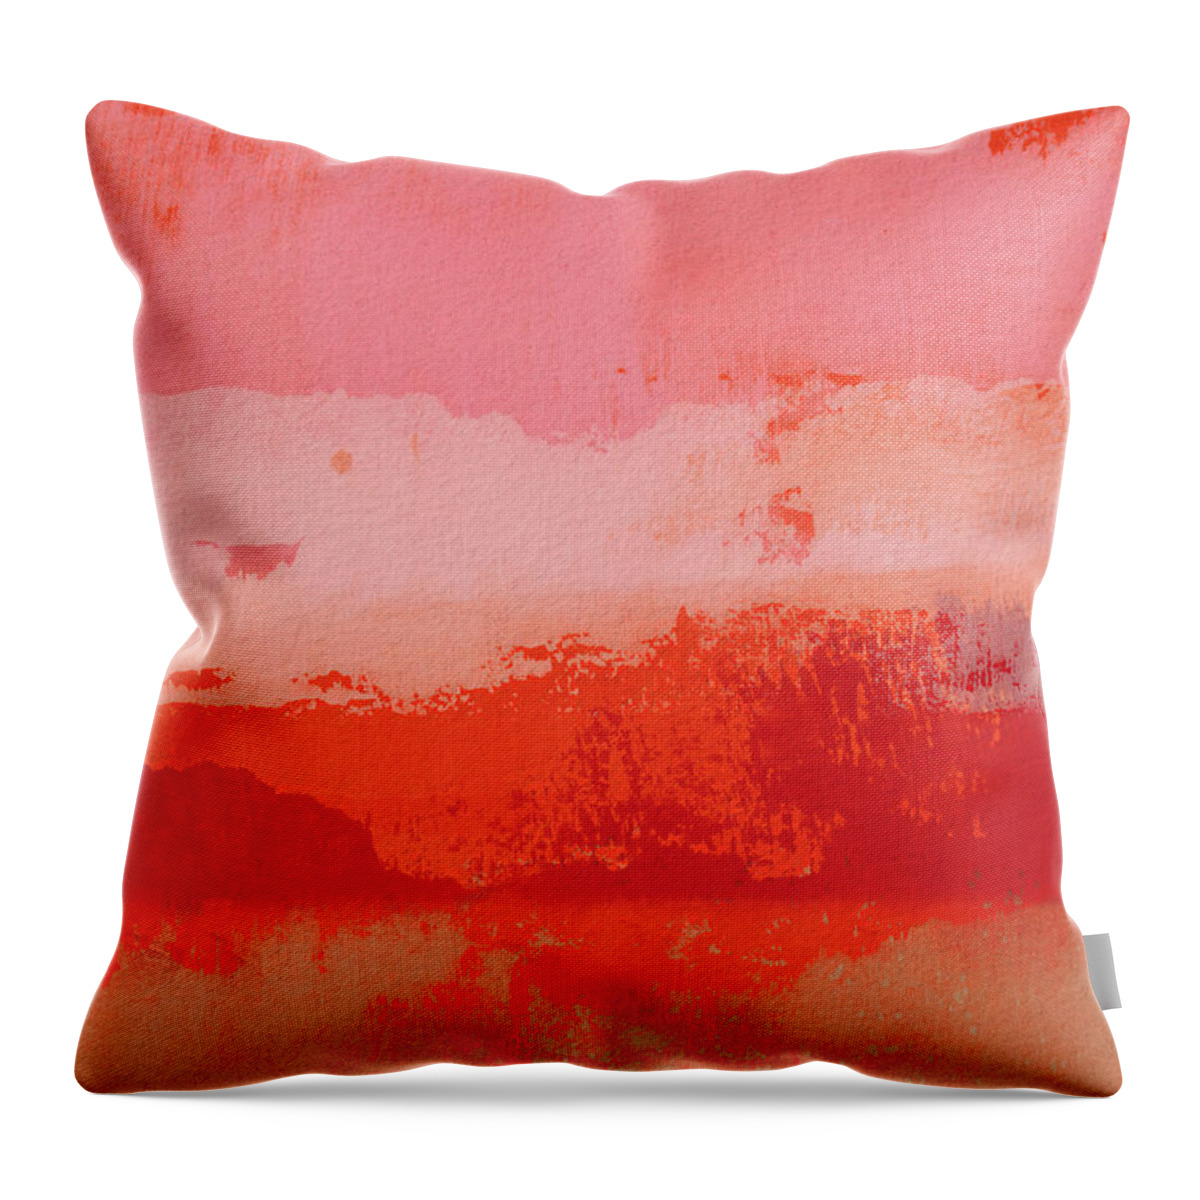 Abstract Throw Pillow featuring the mixed media Overlapping- Art by Linda Woods by Linda Woods